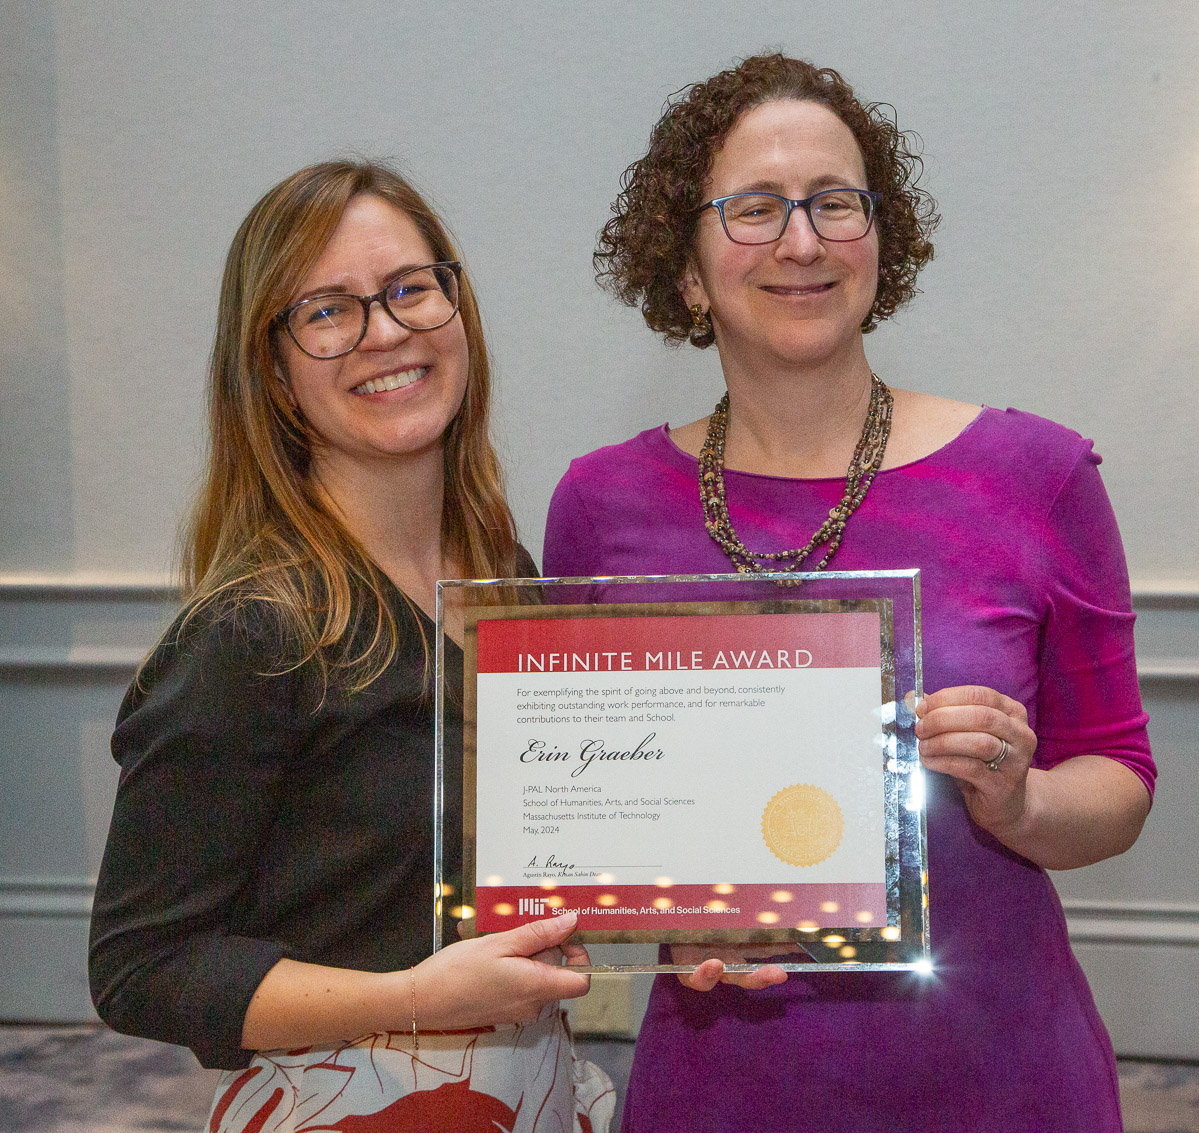 Congratulations to J-PAL's @aprilleknox and @JPAL_NA's @erin_graeber for receiving the @MIT_SHASS Infinite Mile Award! They have both made outstanding contributions to J-PAL's mission—we are so grateful to have them on our team.